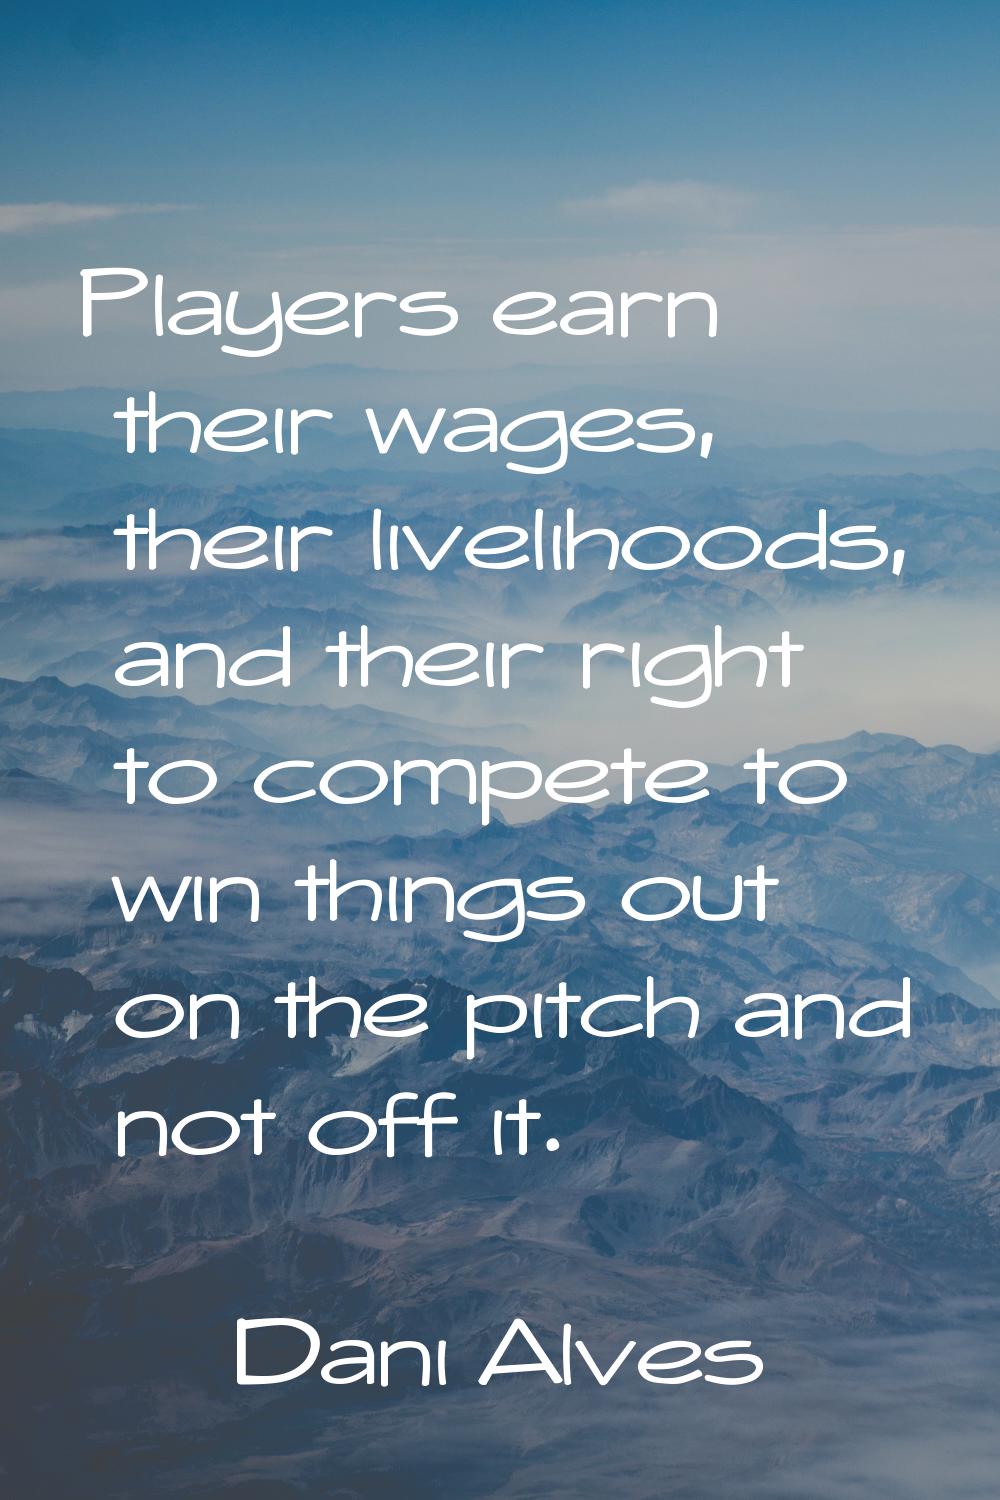 Players earn their wages, their livelihoods, and their right to compete to win things out on the pi